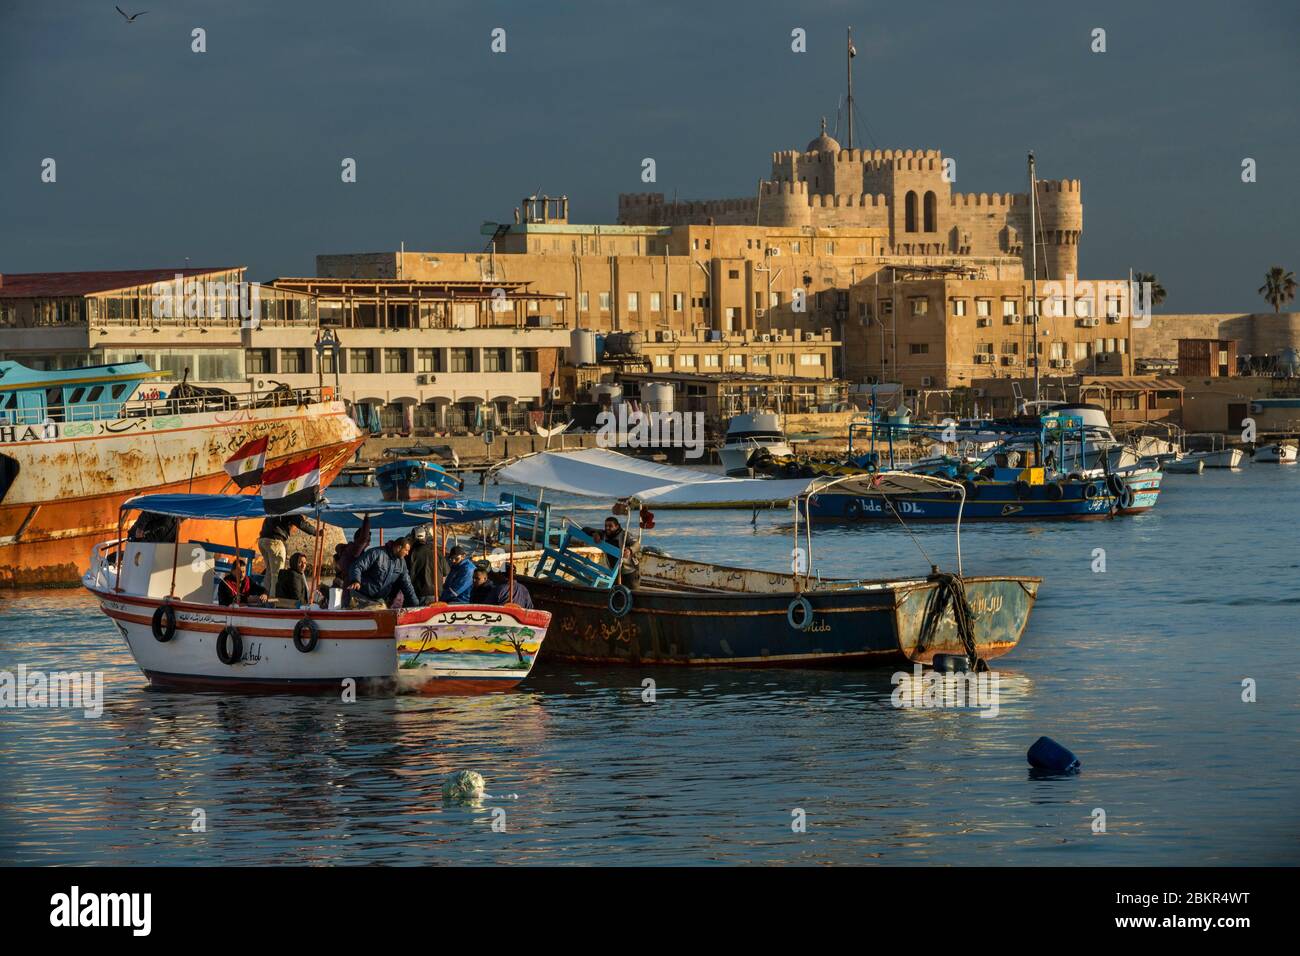 Egypt, Lower Egypt, the Mediterranean coast, Alexandria, the Corniche, fishing boats anchored in the bay, Qait Bay fortress at the back Stock Photo